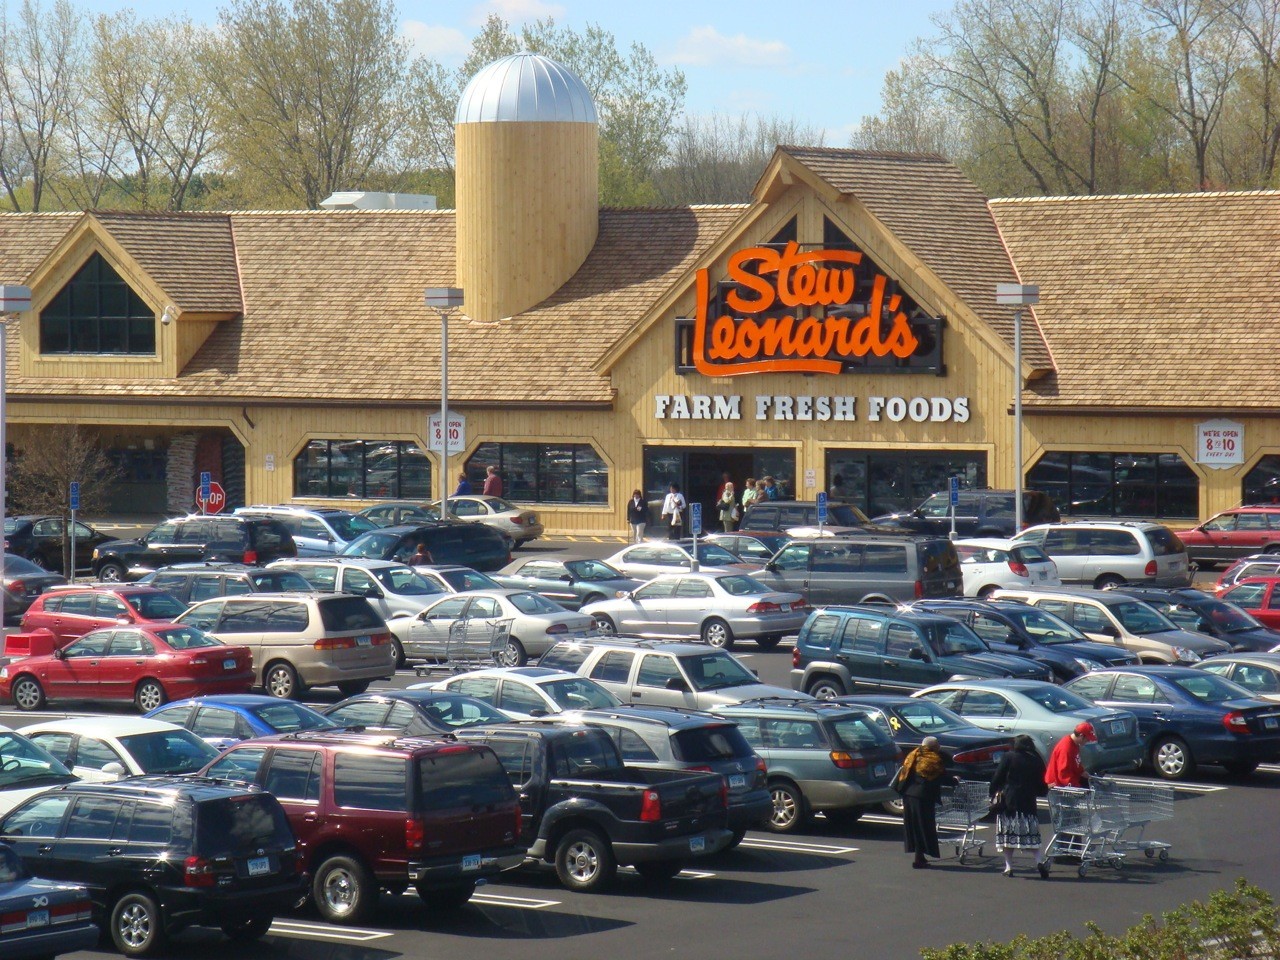 Representatives of farm fresh food grocer Stew Leonard’s  announced Thursday that East Meadow will be home to its sixth grocery store and second location on Long Island. The Newington, Conn. shop is pictured above.